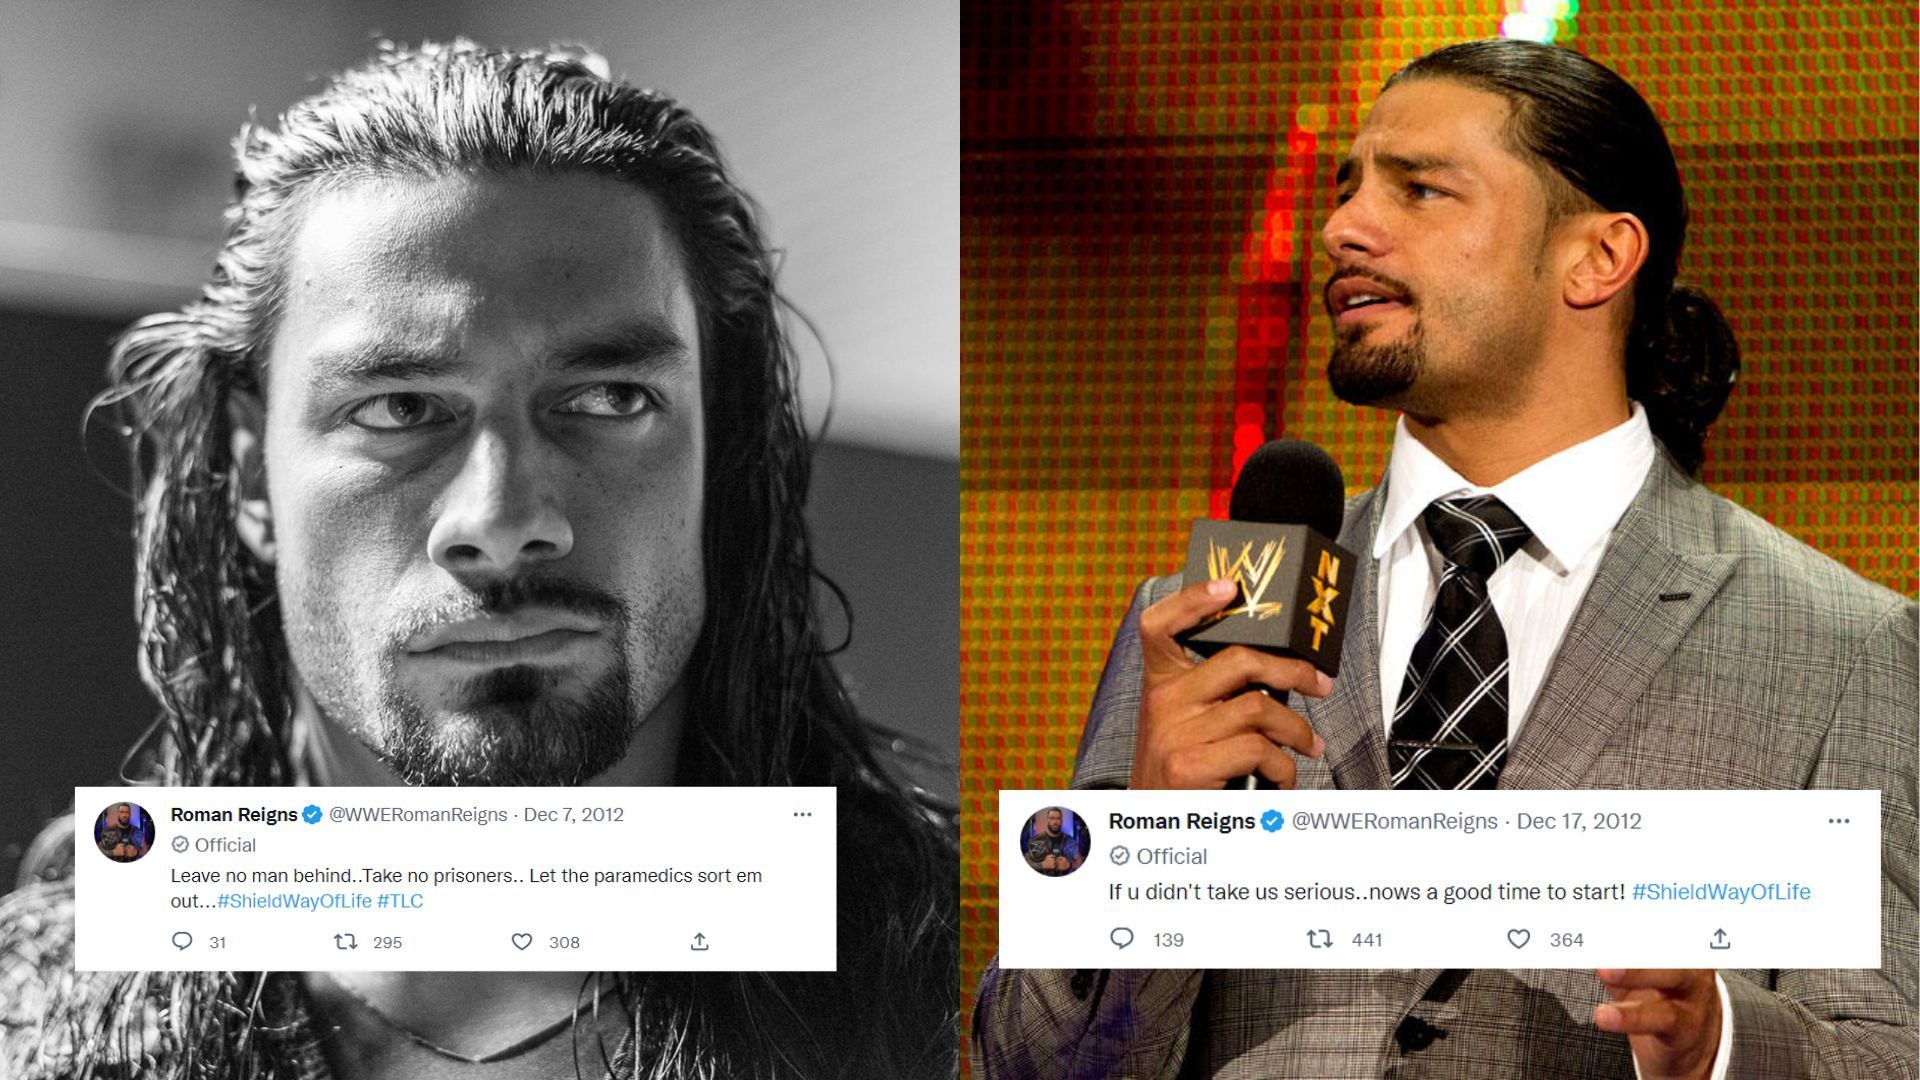 Roman Reigns began tweeting in December 2012, four months after joining the site.